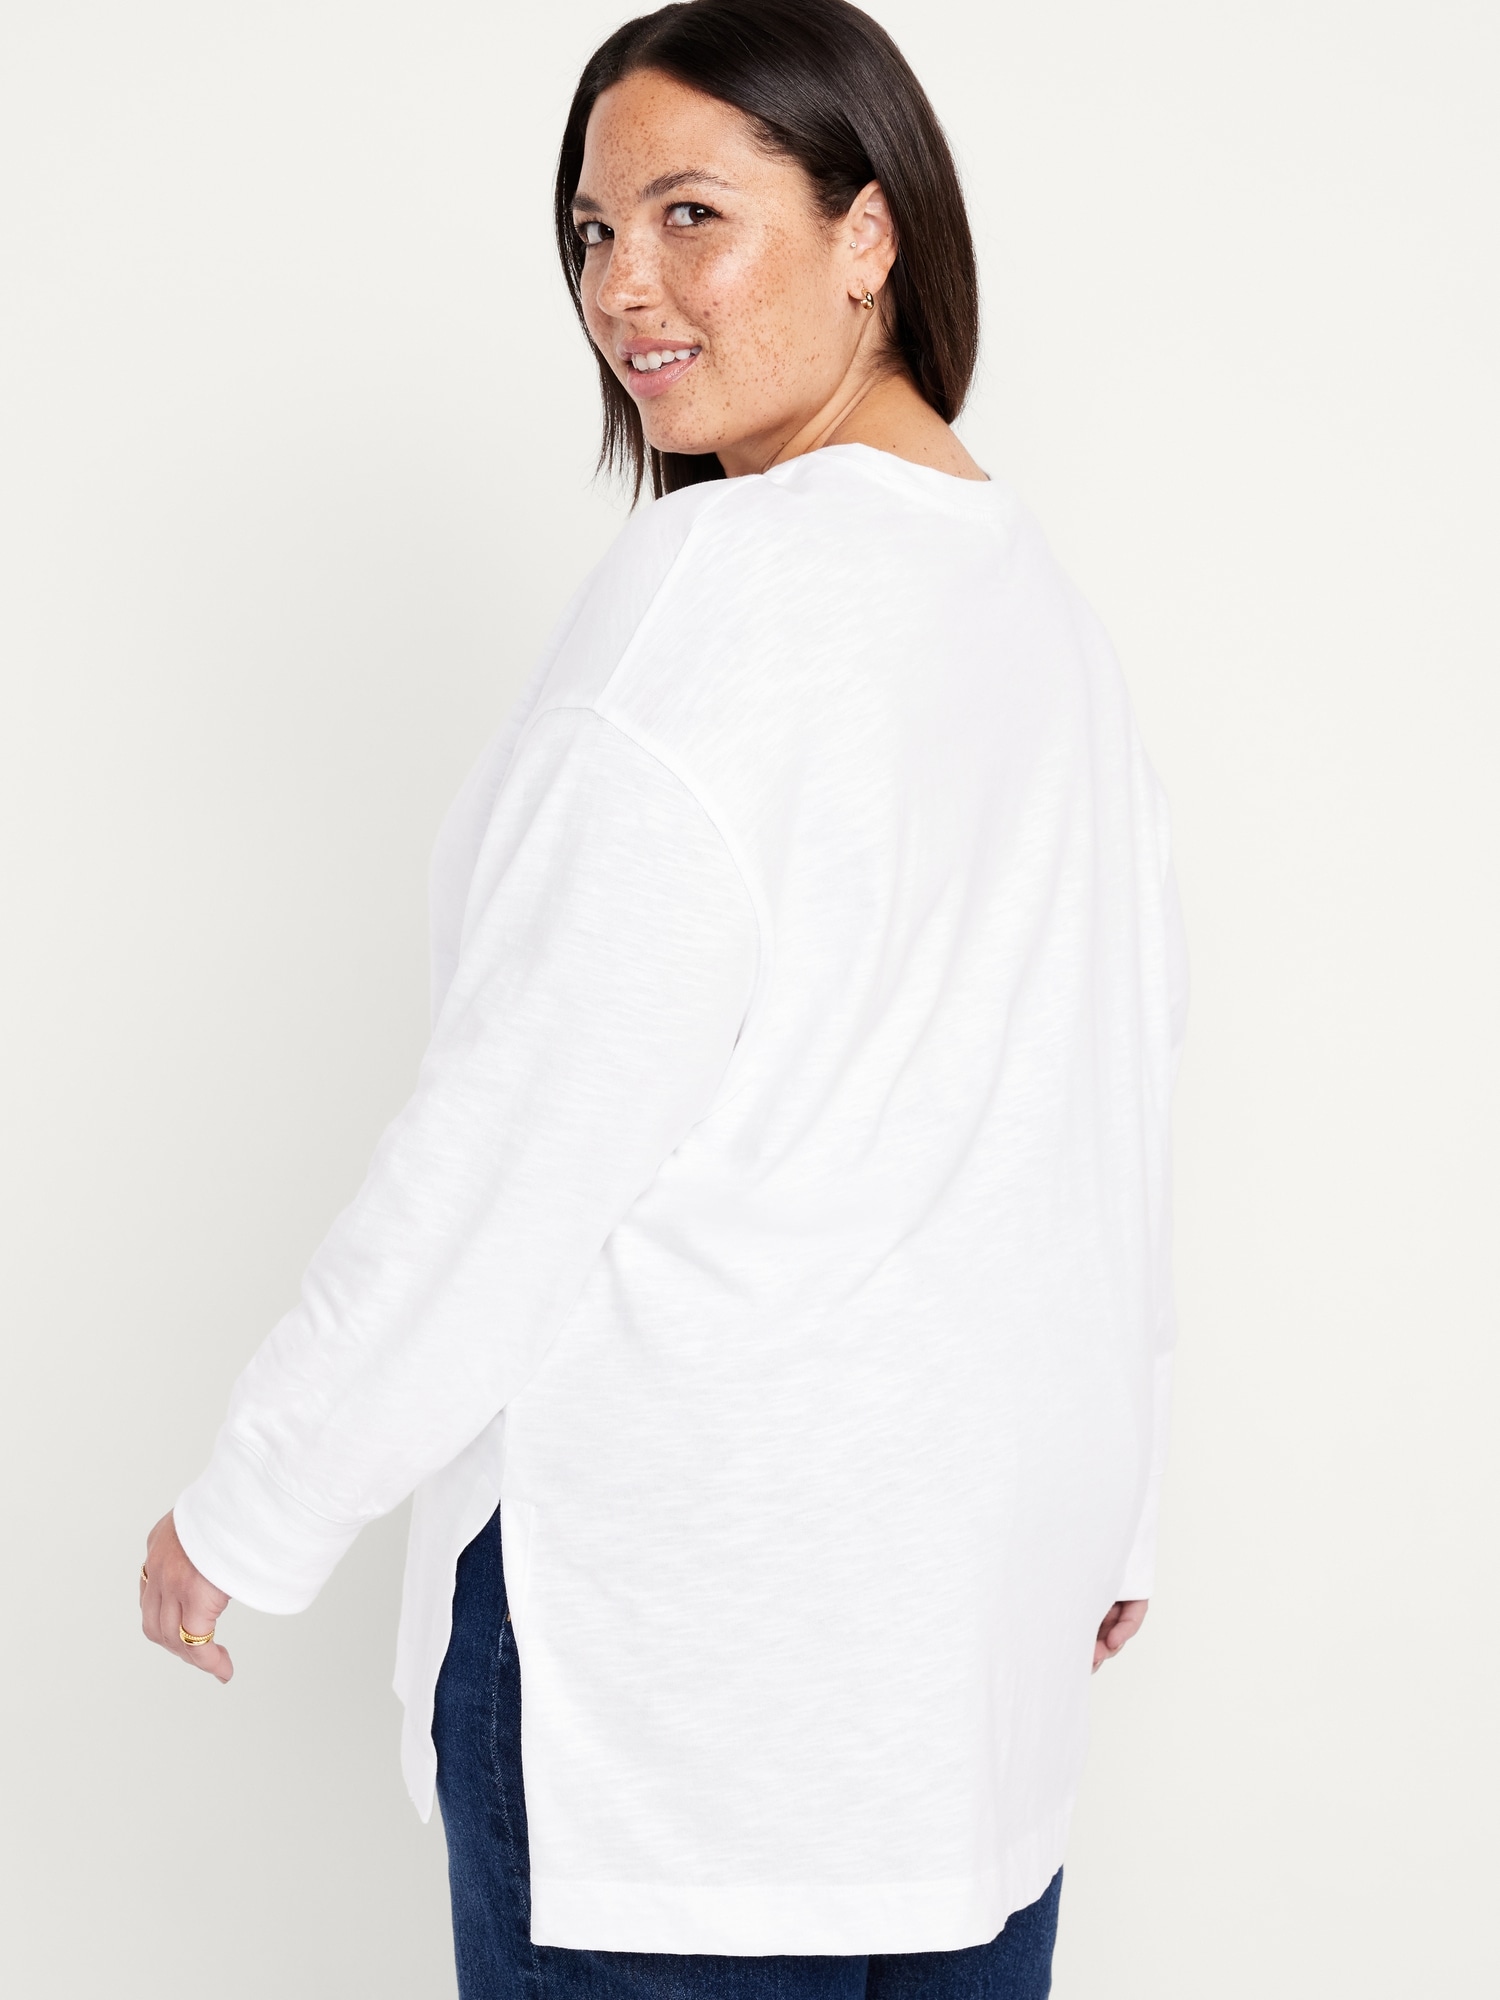 Vintage Long-Sleeve Tunic T-Shirt for Women | Old Navy